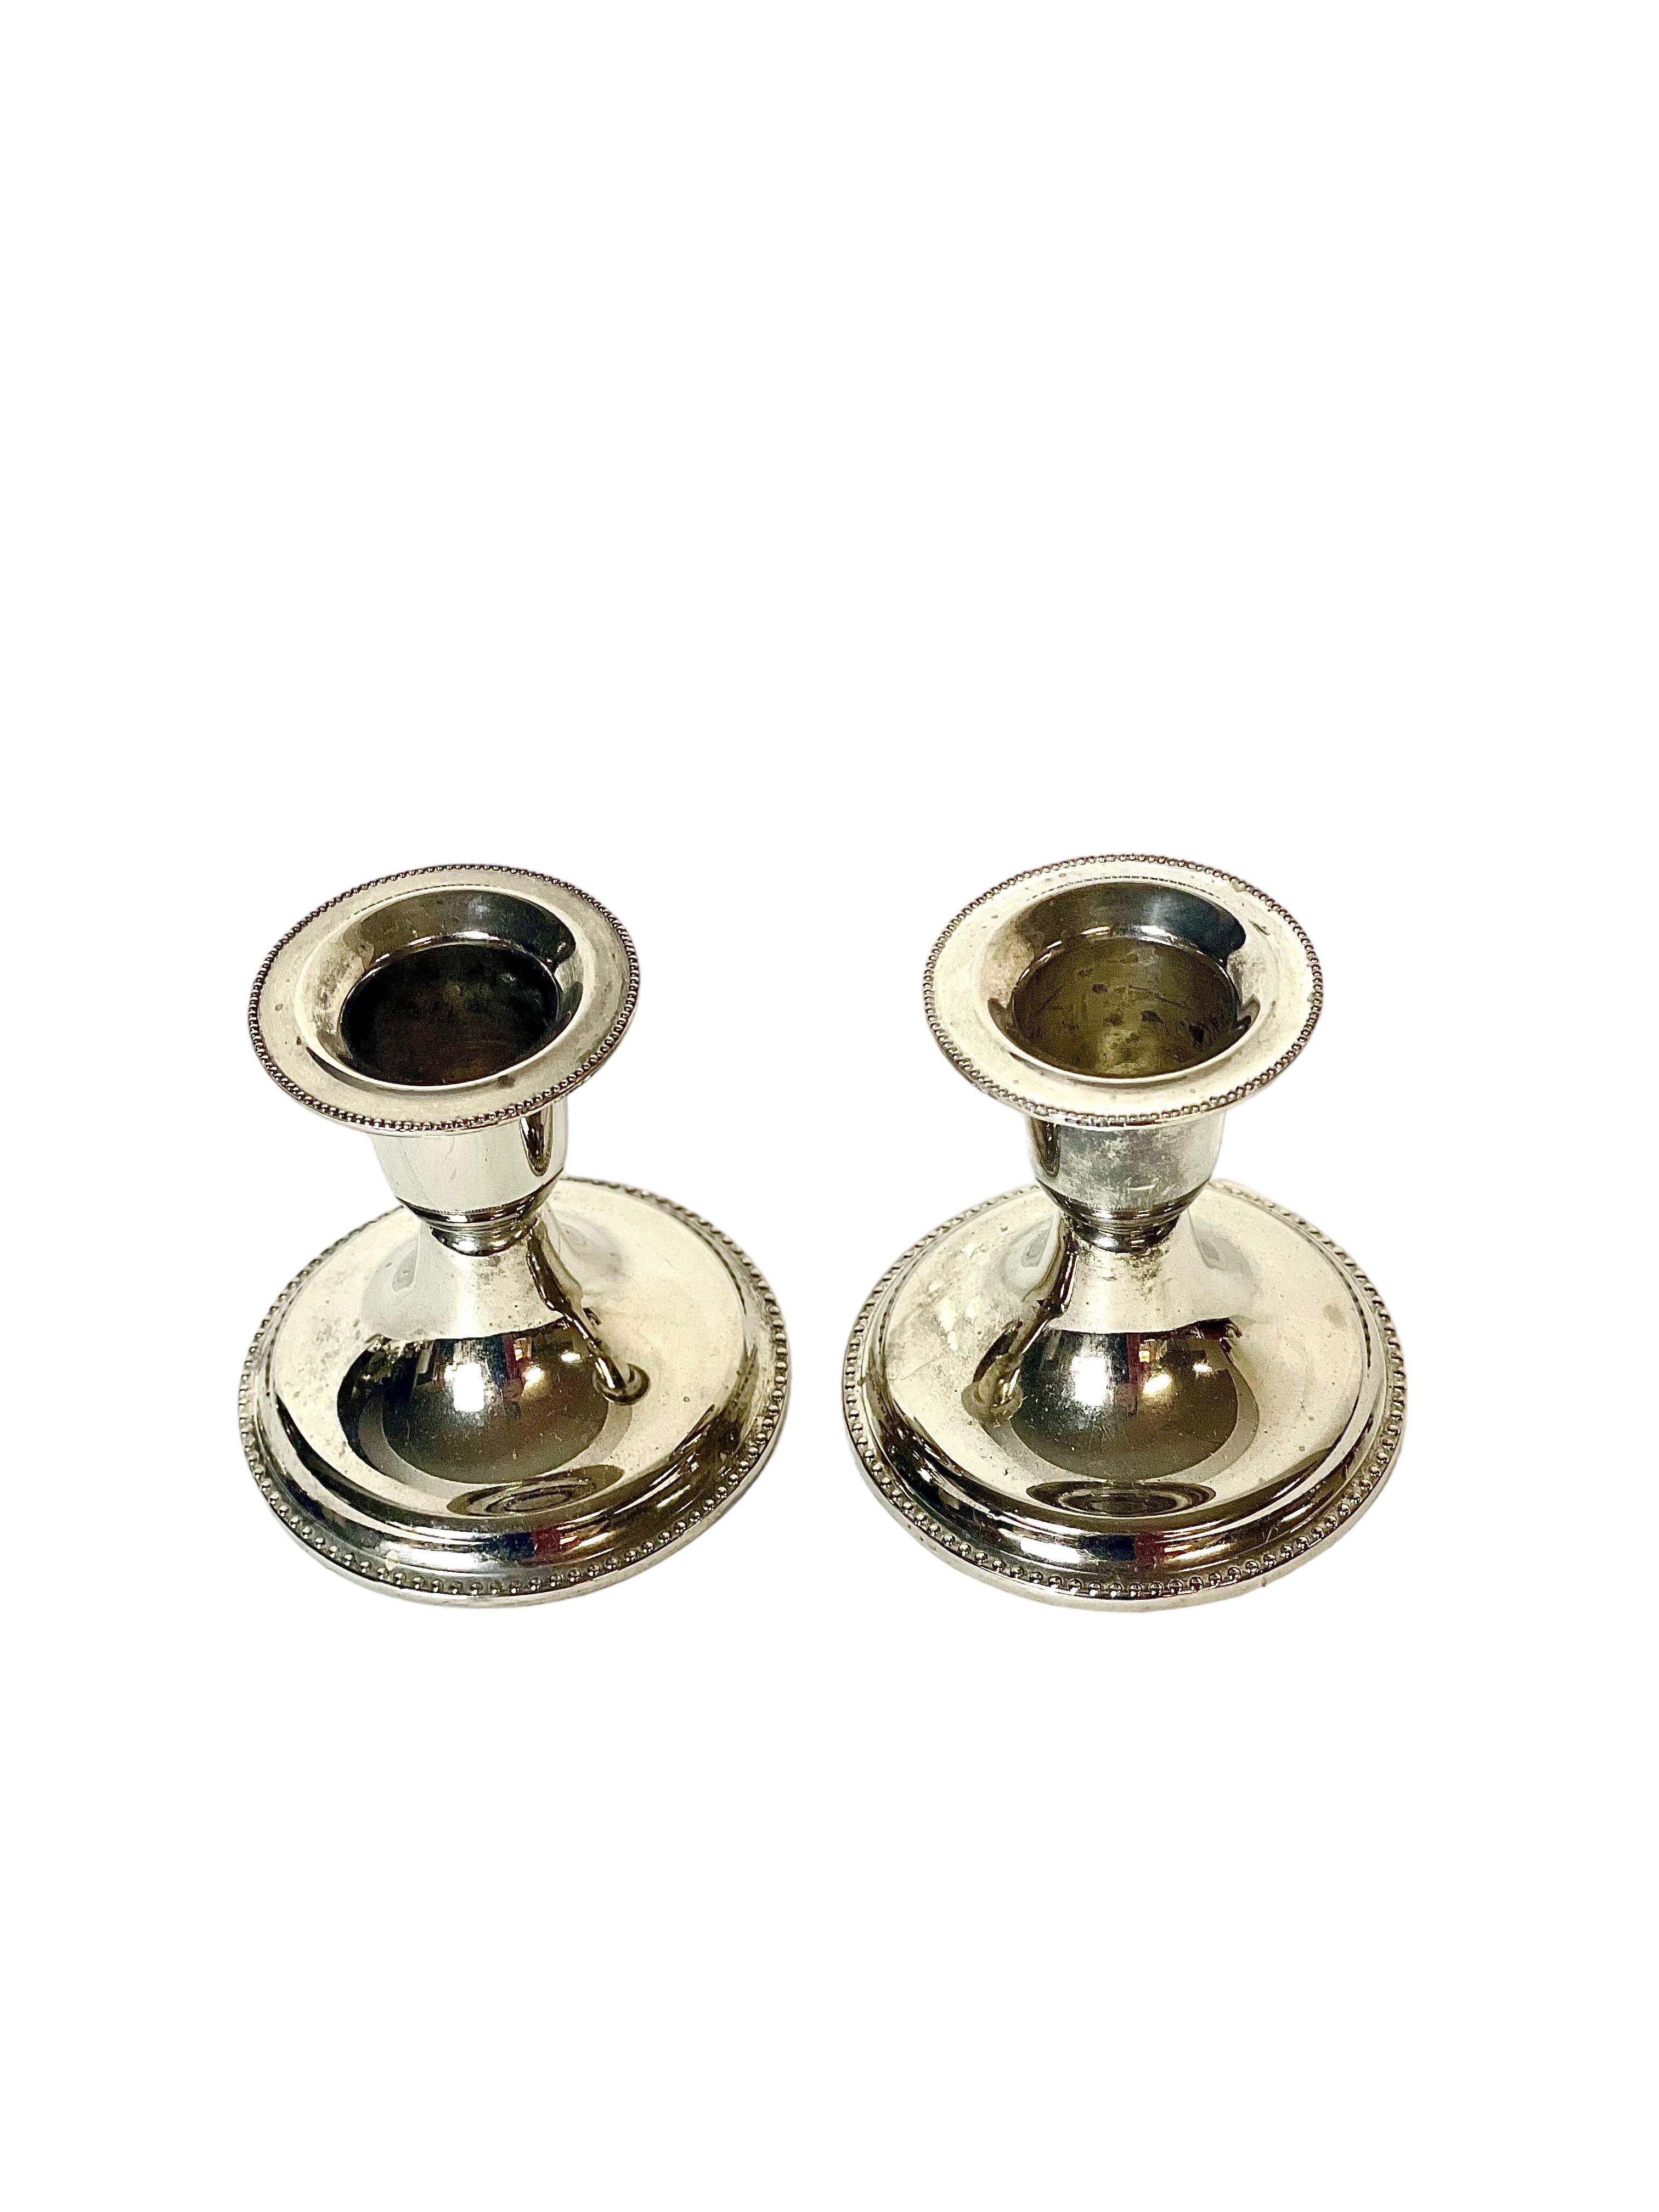 A pair of small, antique Louis XVI style silver-plated candlesticks, with a beaded pearl pattern around the upper rim and the gently flared pedestal base. This matching pair would ideally suit a smart dining table or a mantelpiece.